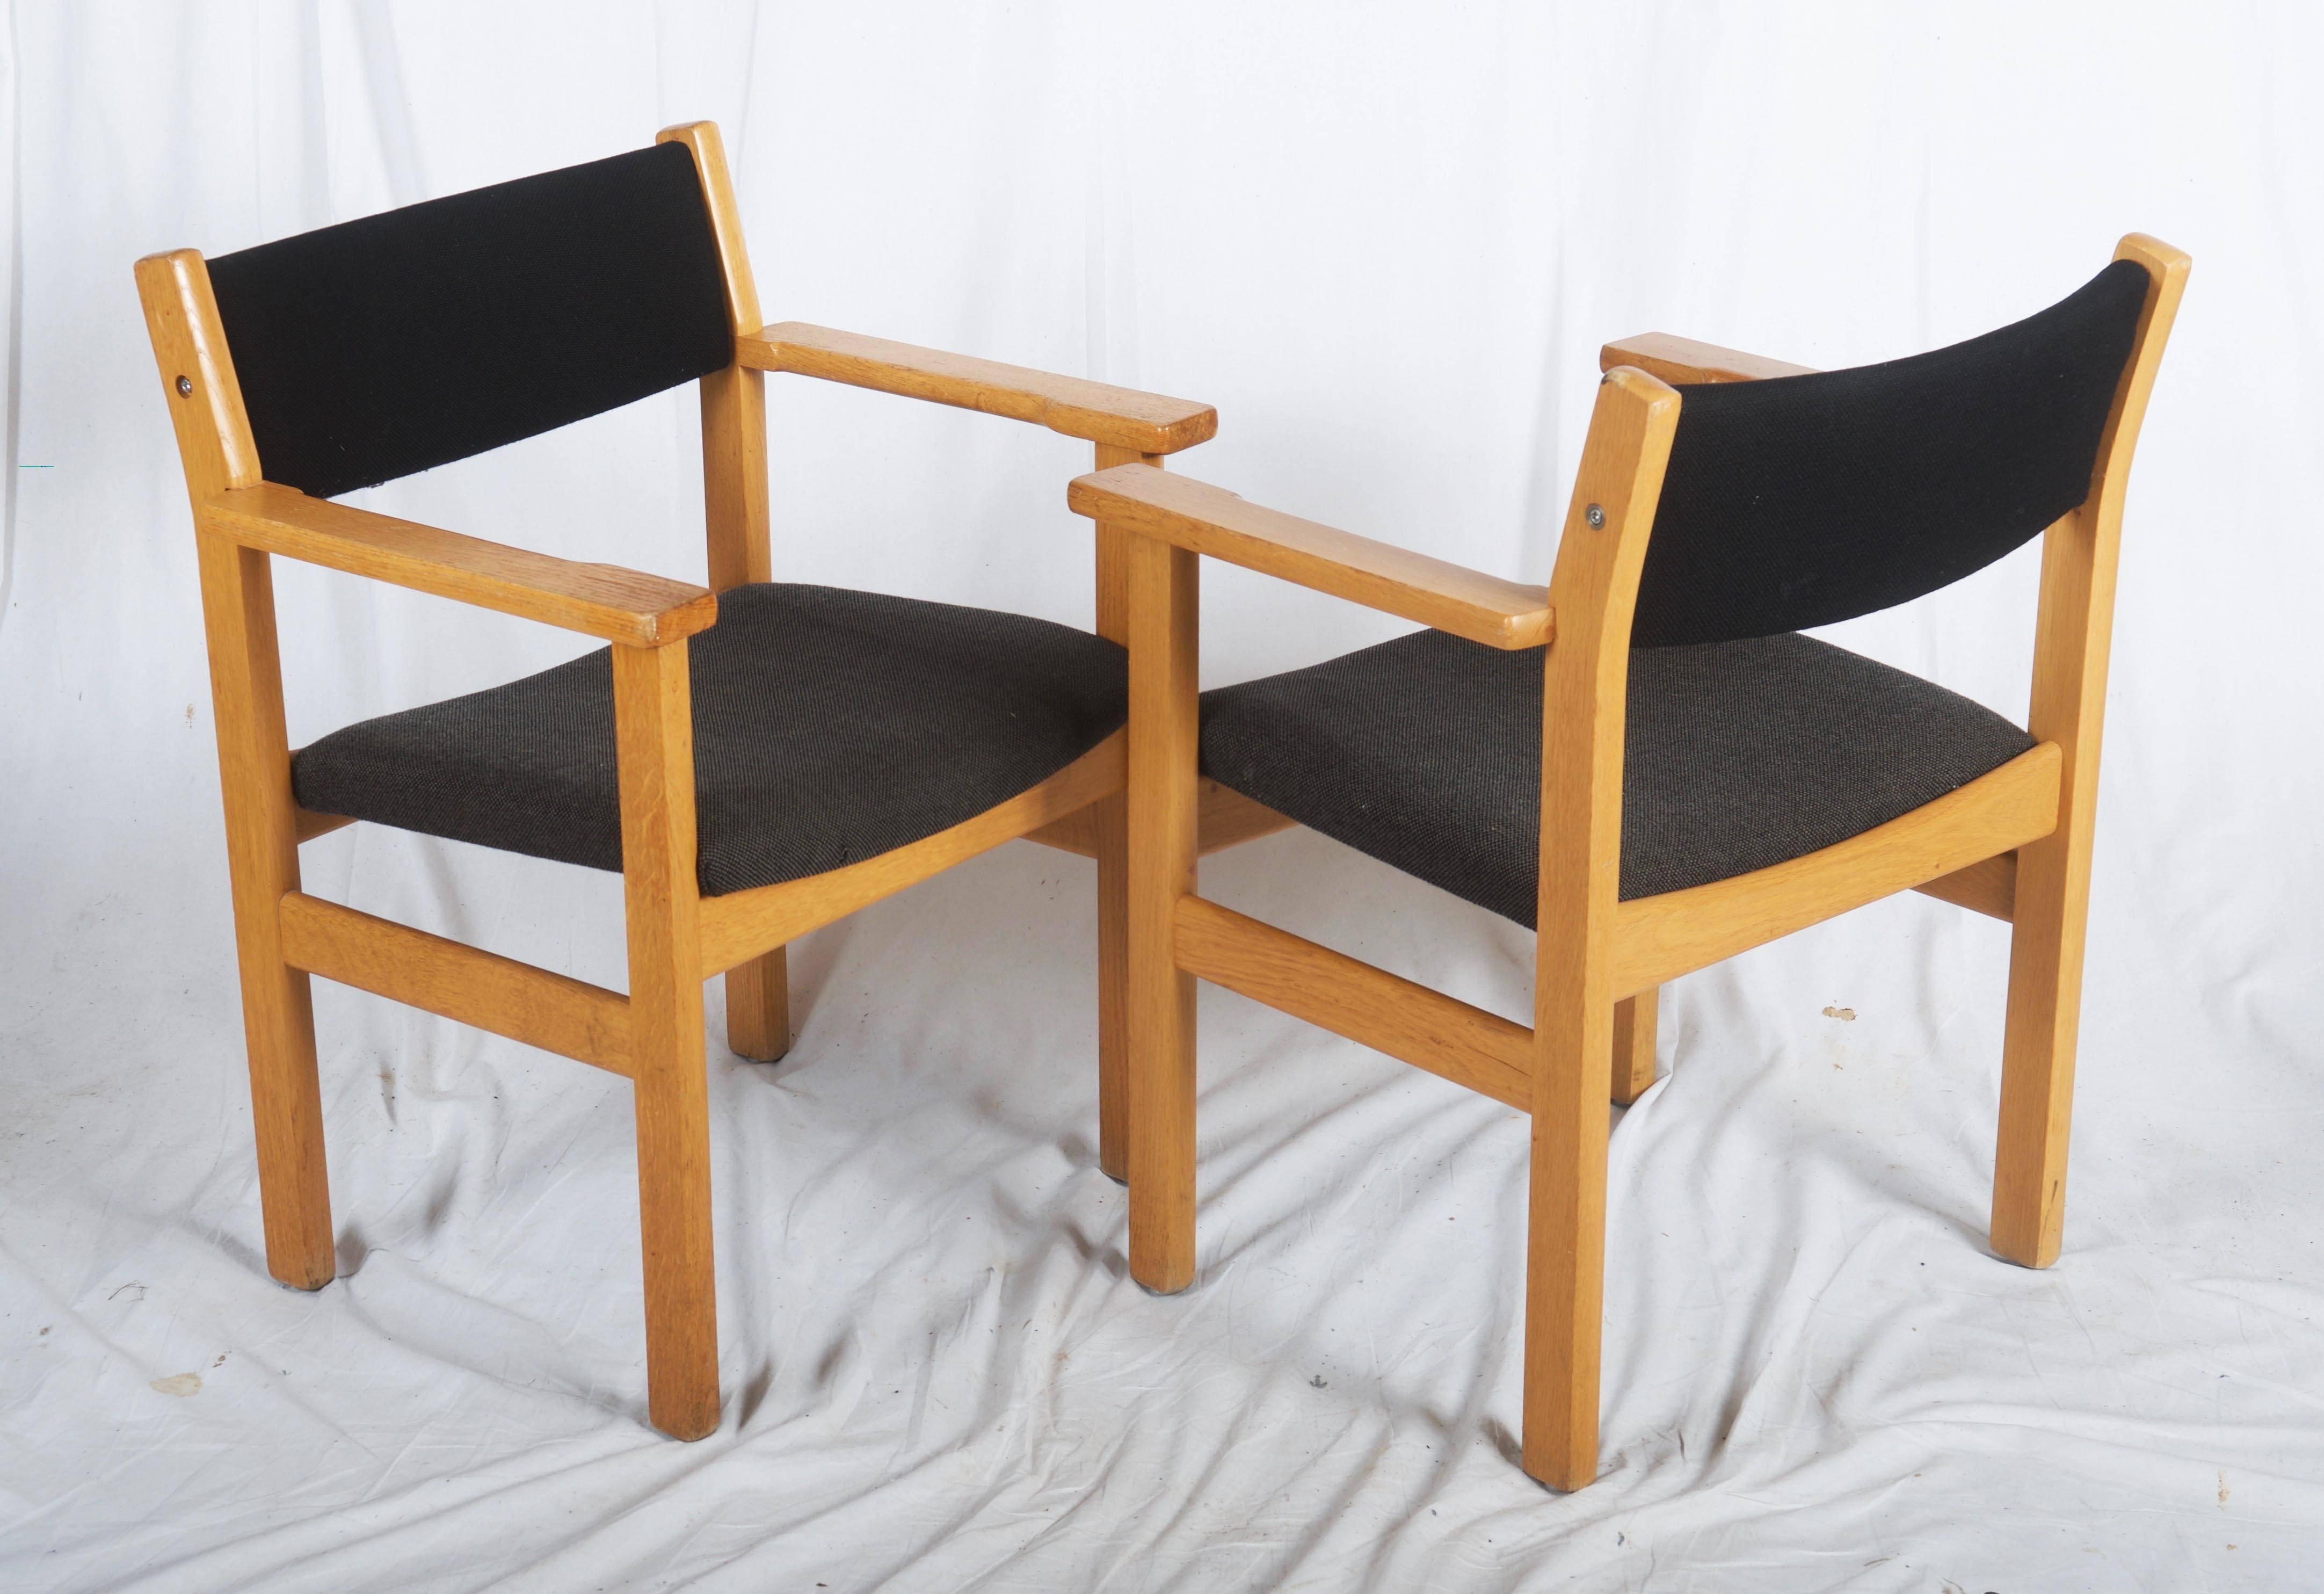 Danish armchairs designed by Hans Wegner for GETAMA, Denmark. 
Chairs are made of solid oak and covered with original fabric. 
Some slight scuffing and scratches based on normal wear but overall in good condition. Fabric is clean and in very good